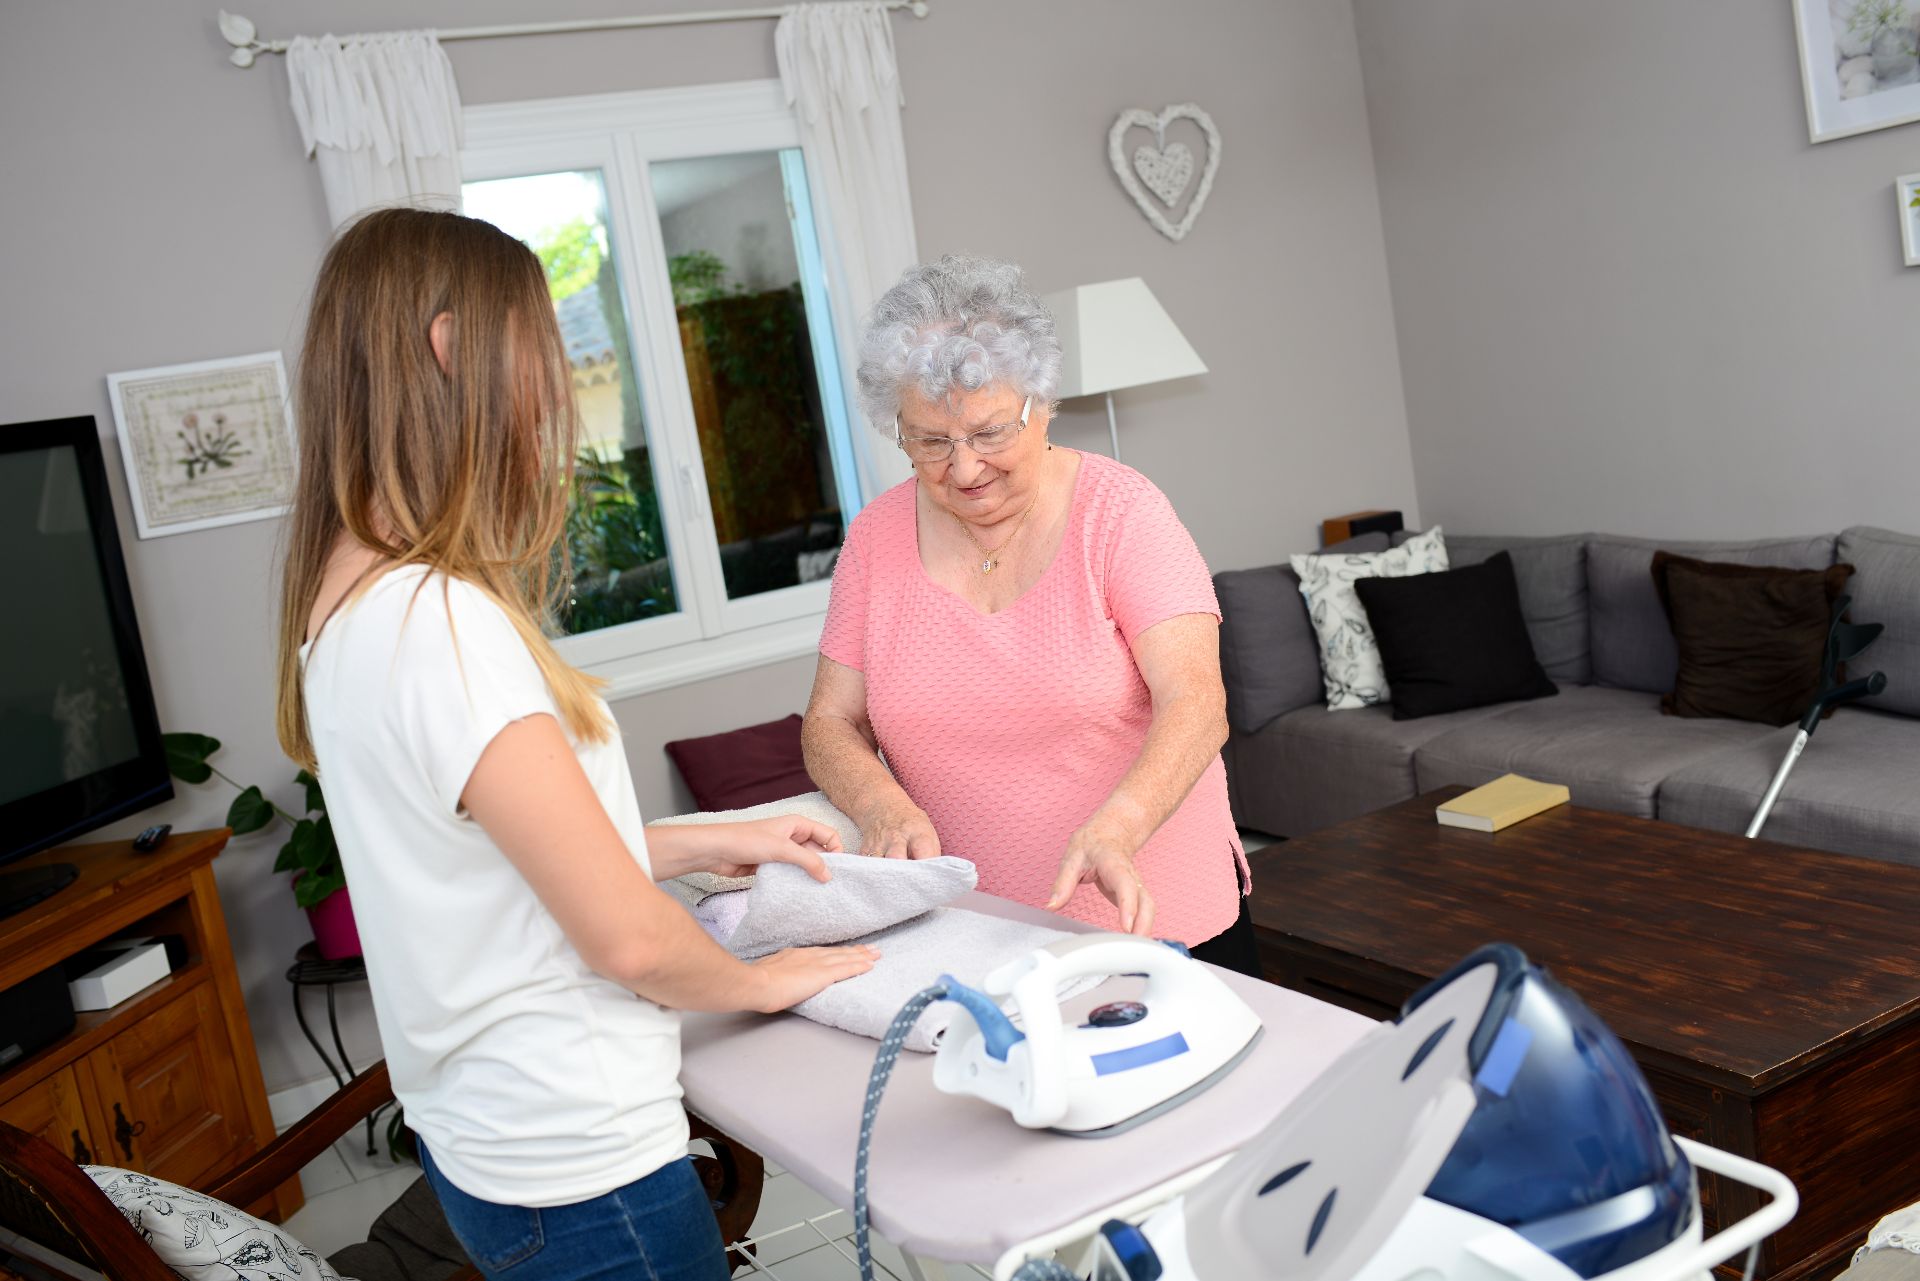 A person assisting with folding and ironing